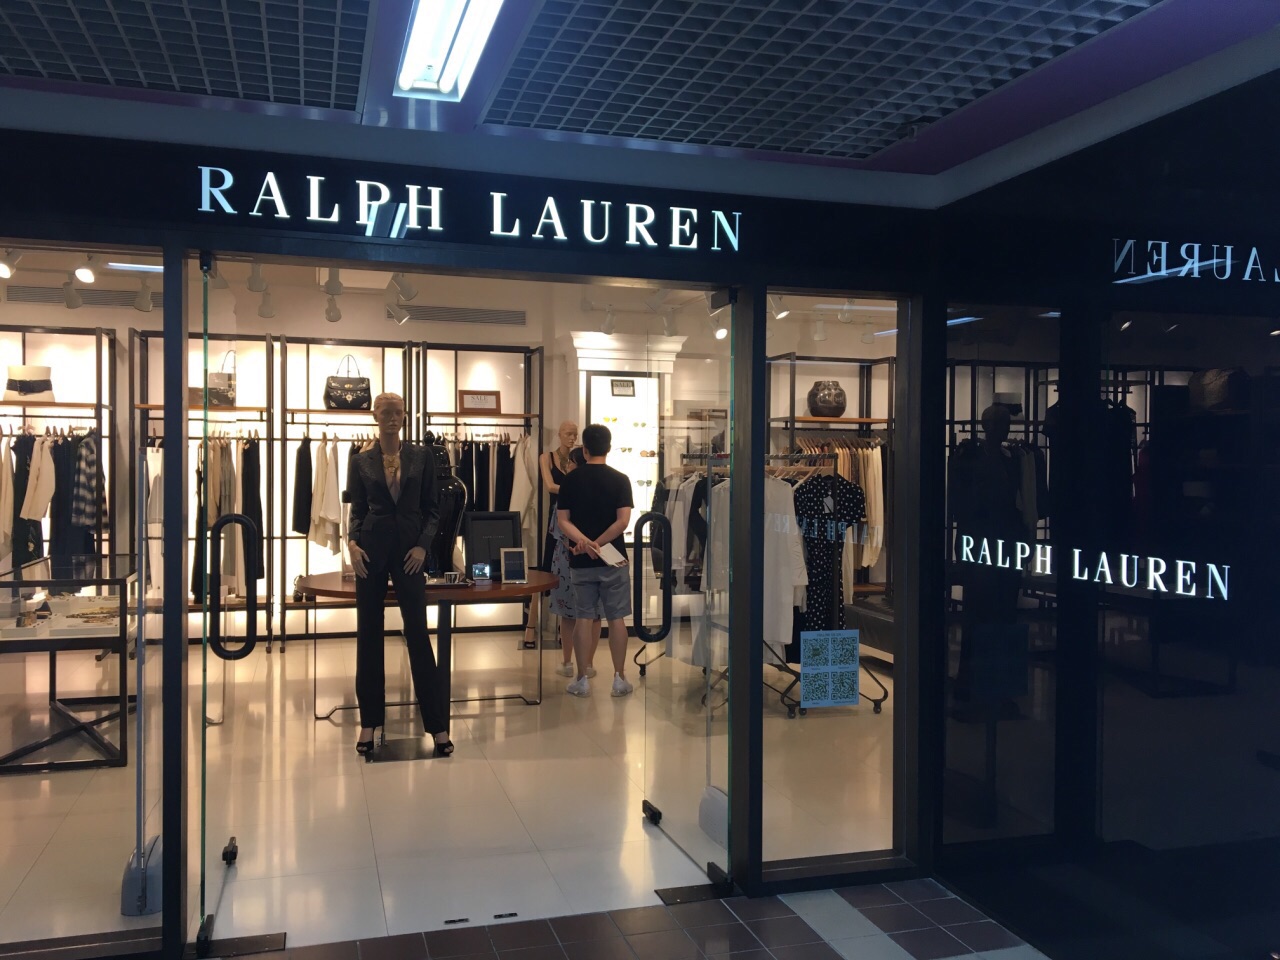 Polo Ralph Lauren Factory Store – The Factory Outlets of Lake